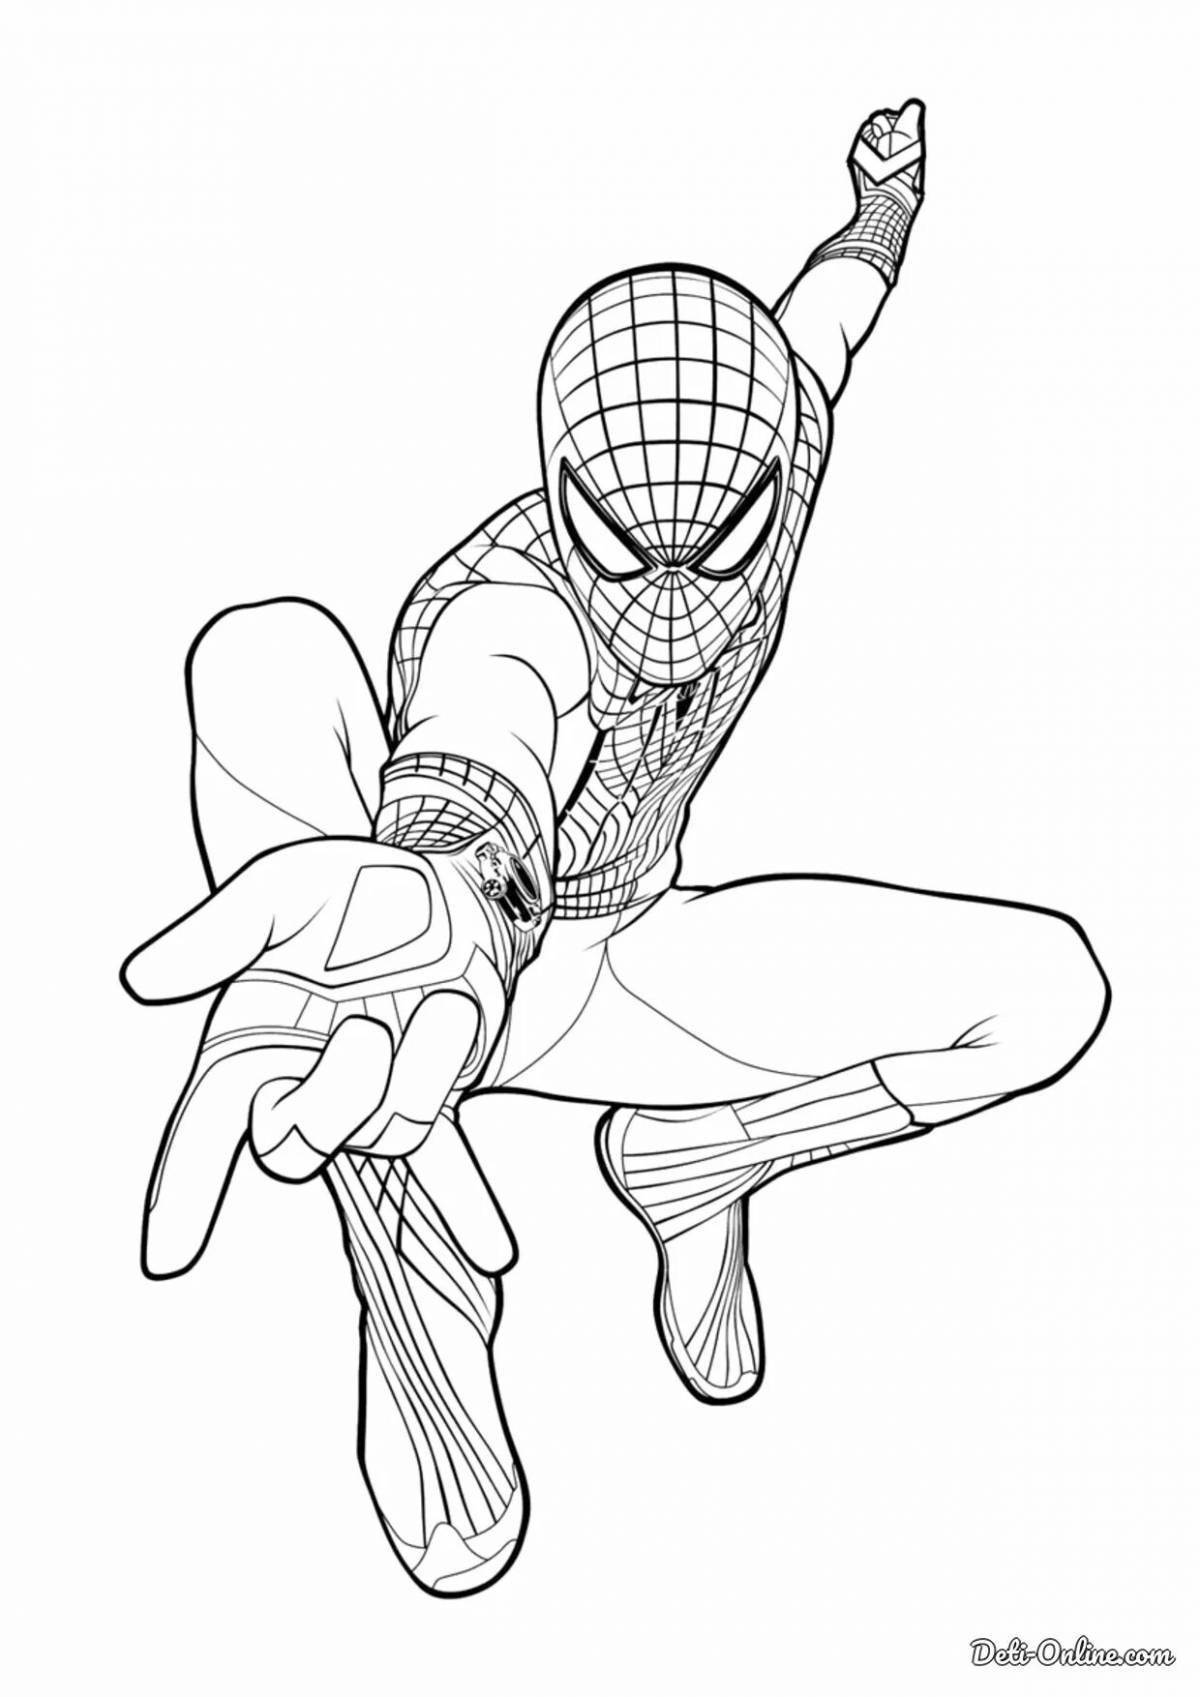 Coloring page playful spider-man